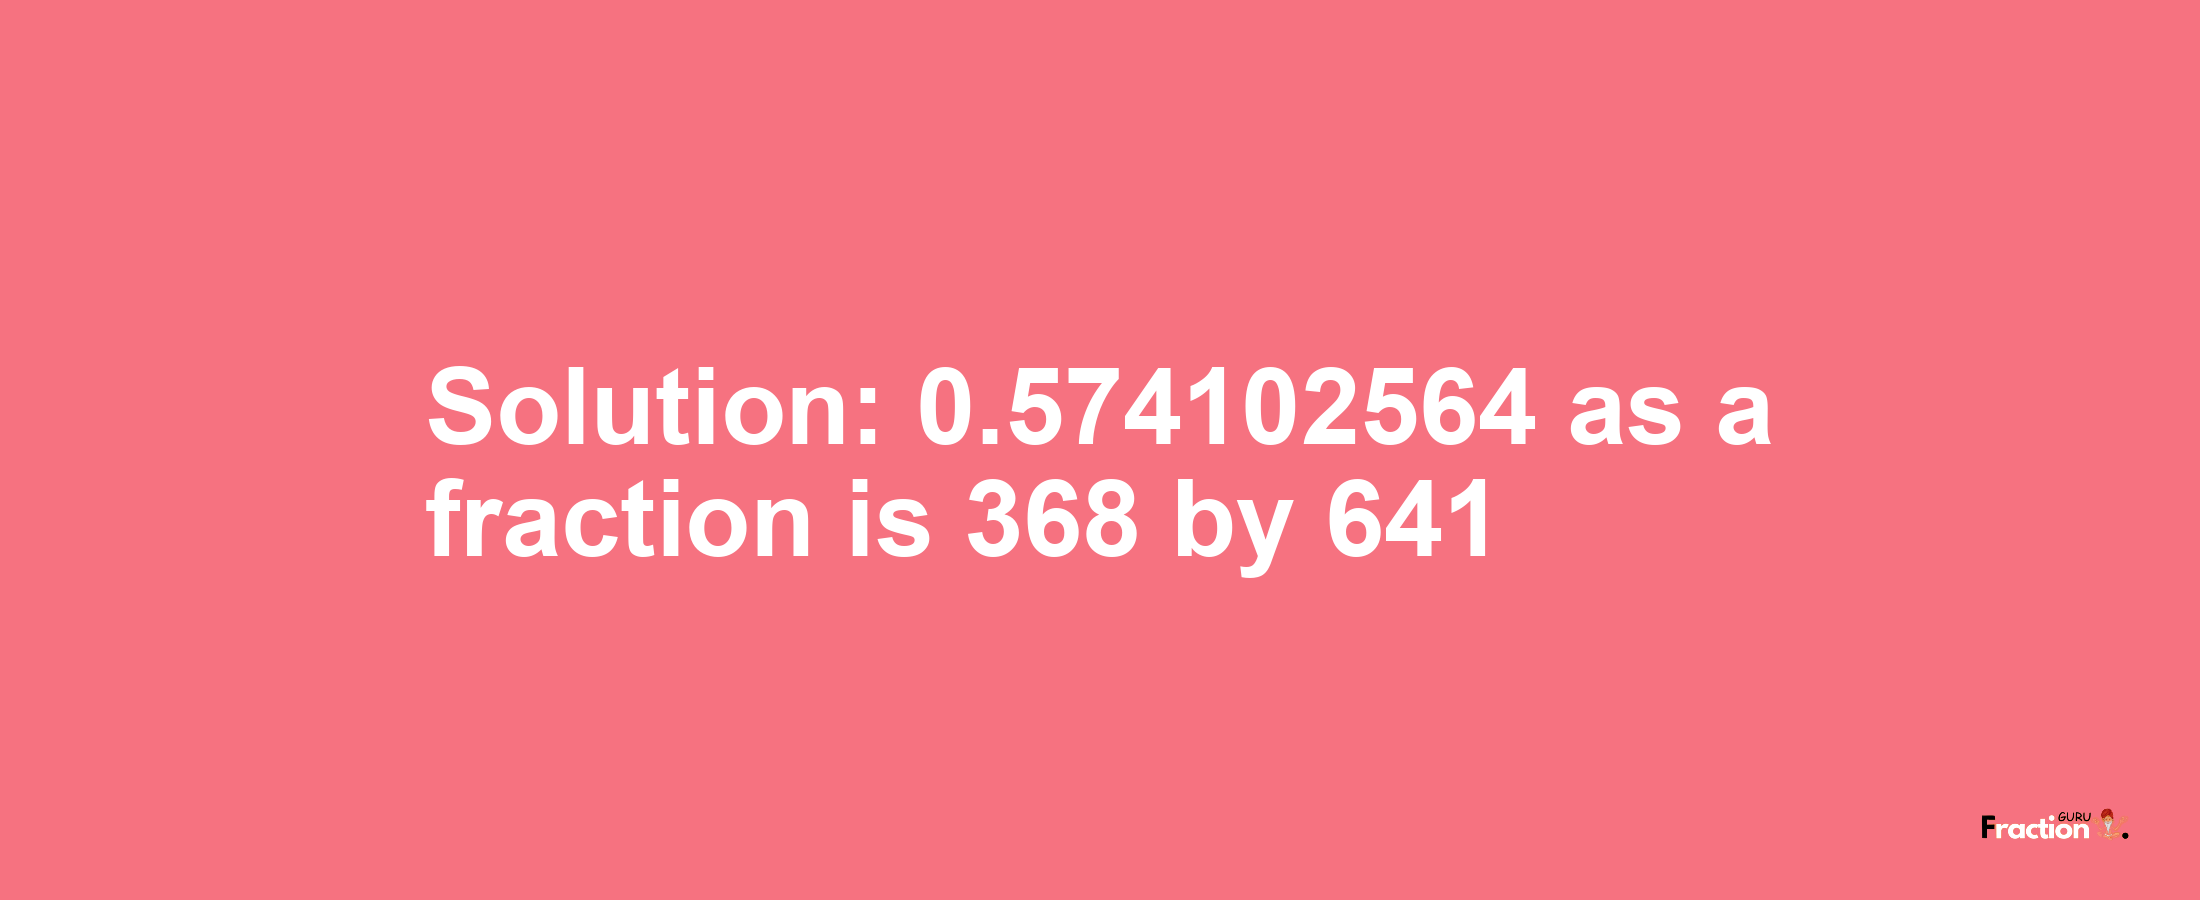 Solution:0.574102564 as a fraction is 368/641